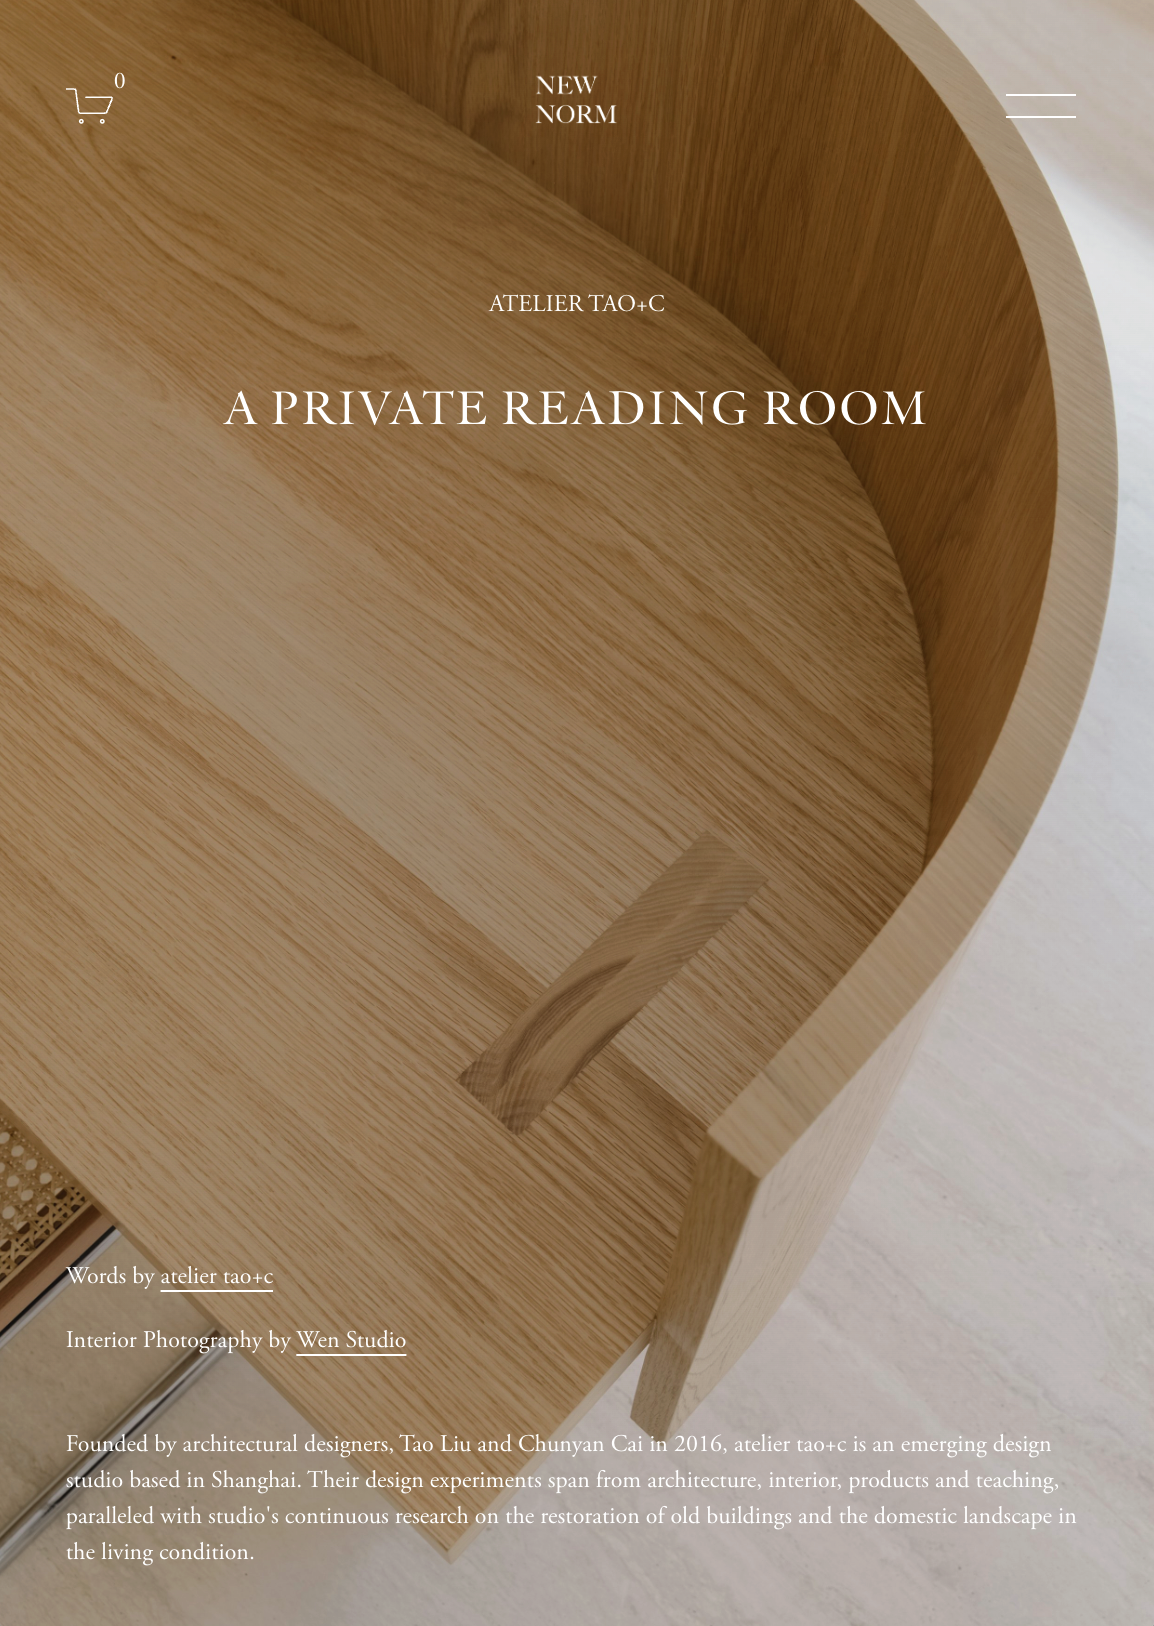 A Private Reading Room – NEW NORM